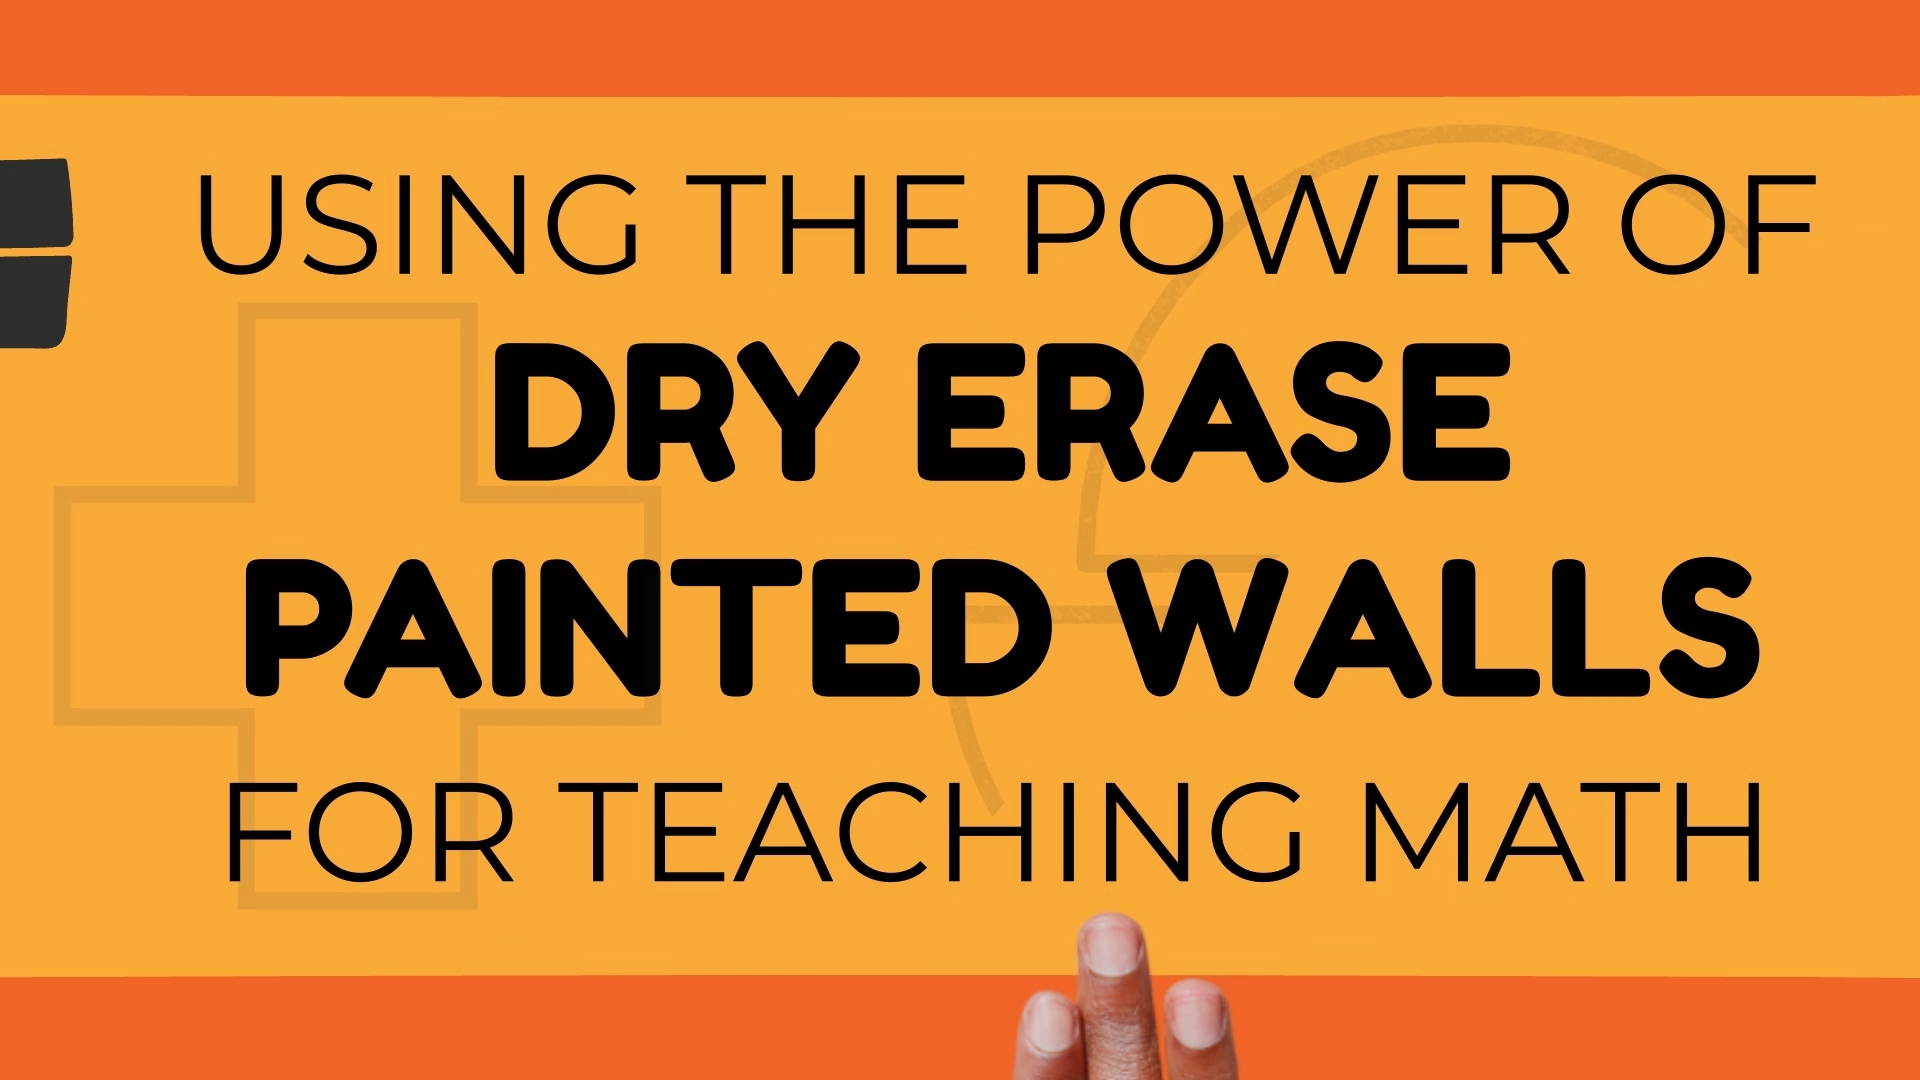 USING THE POWER OF DRY ERASE PAINTED WALLS FOR TEACHING MATH